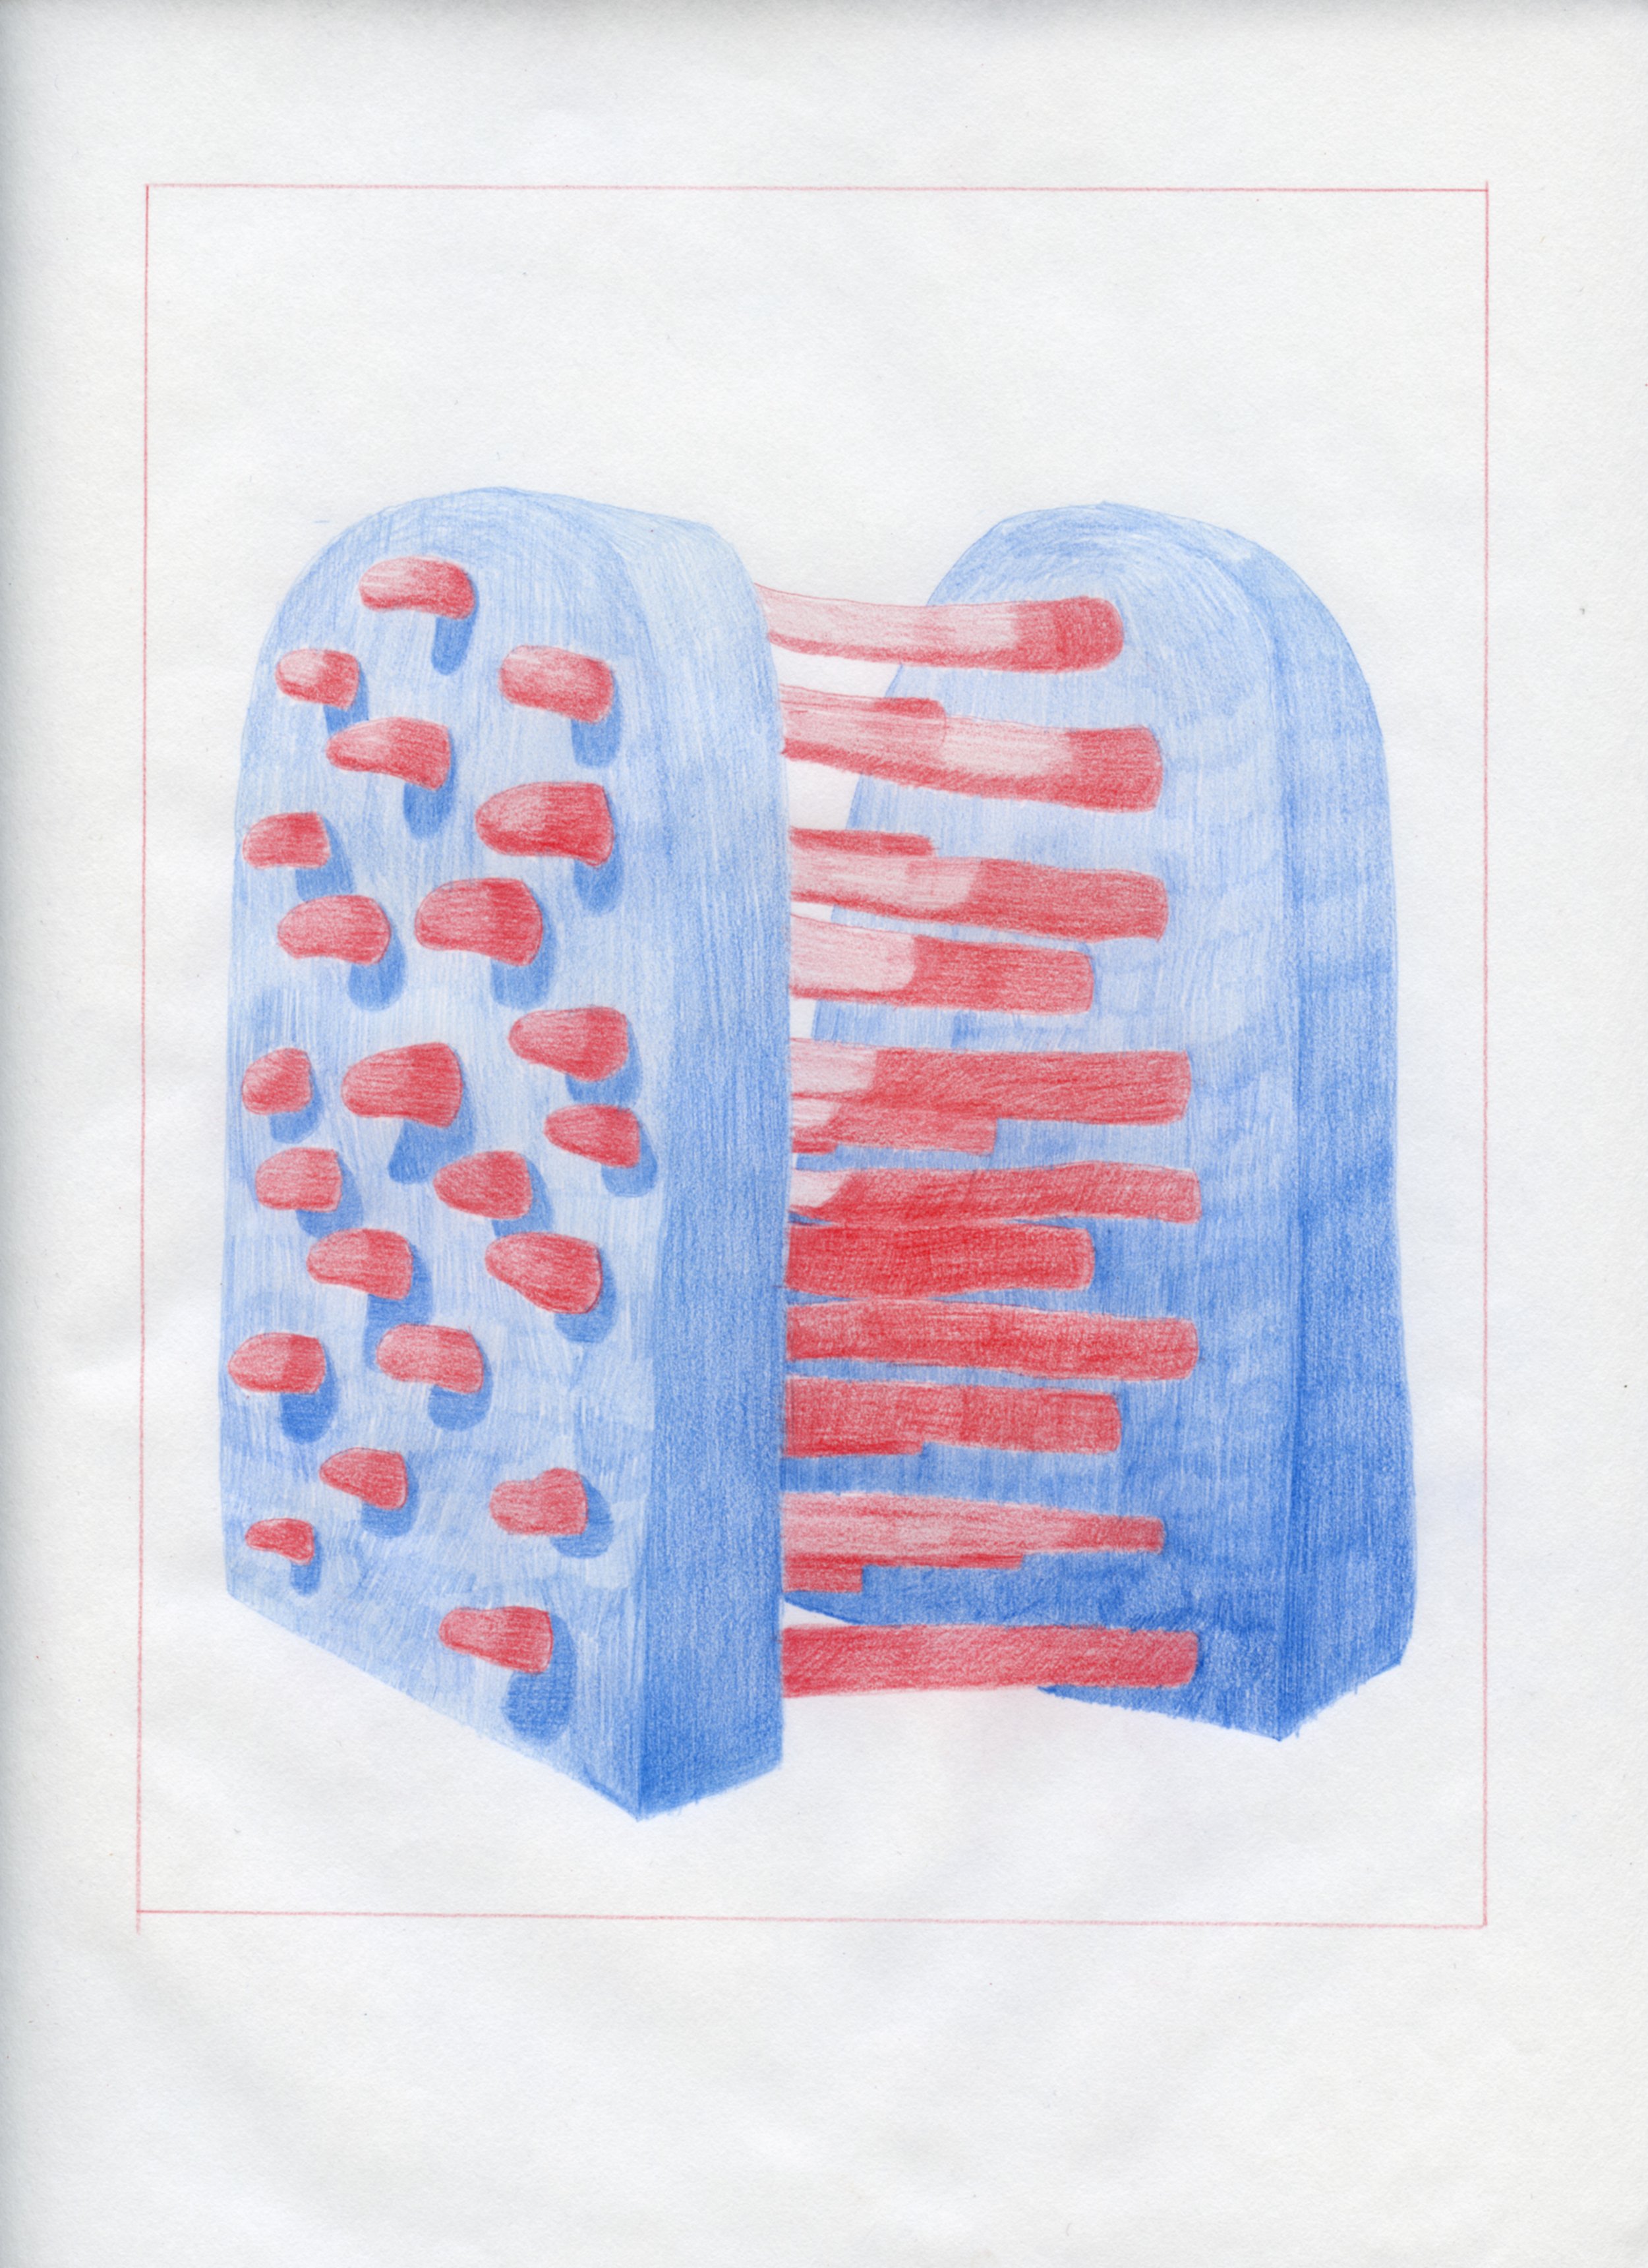  Workplace Drawing #43, 2021, Red and Blue Graphite on Bond Paper, 9”x 12”. 